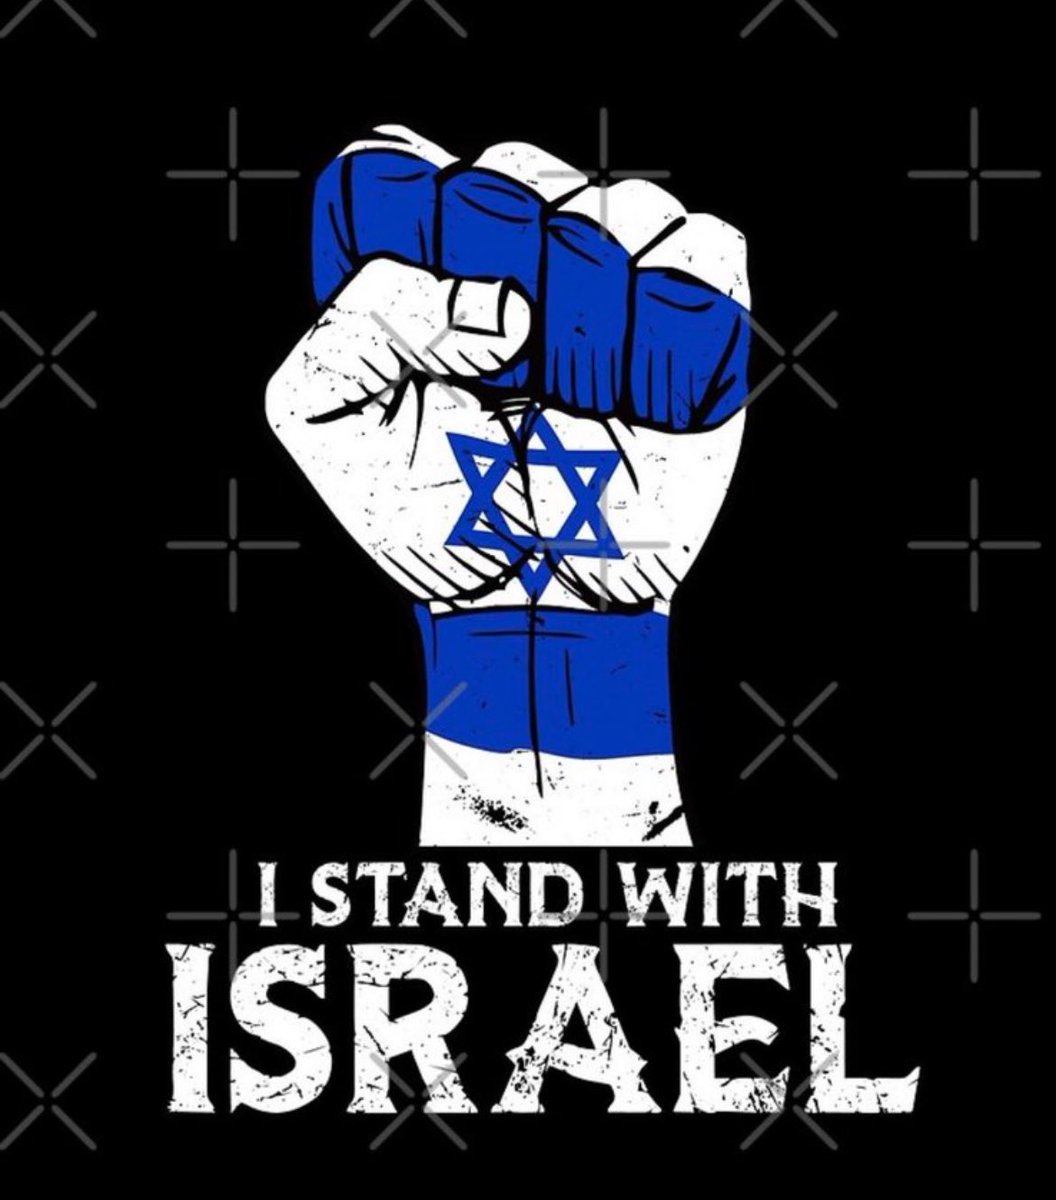 RT if you stand with #Isreal ✊